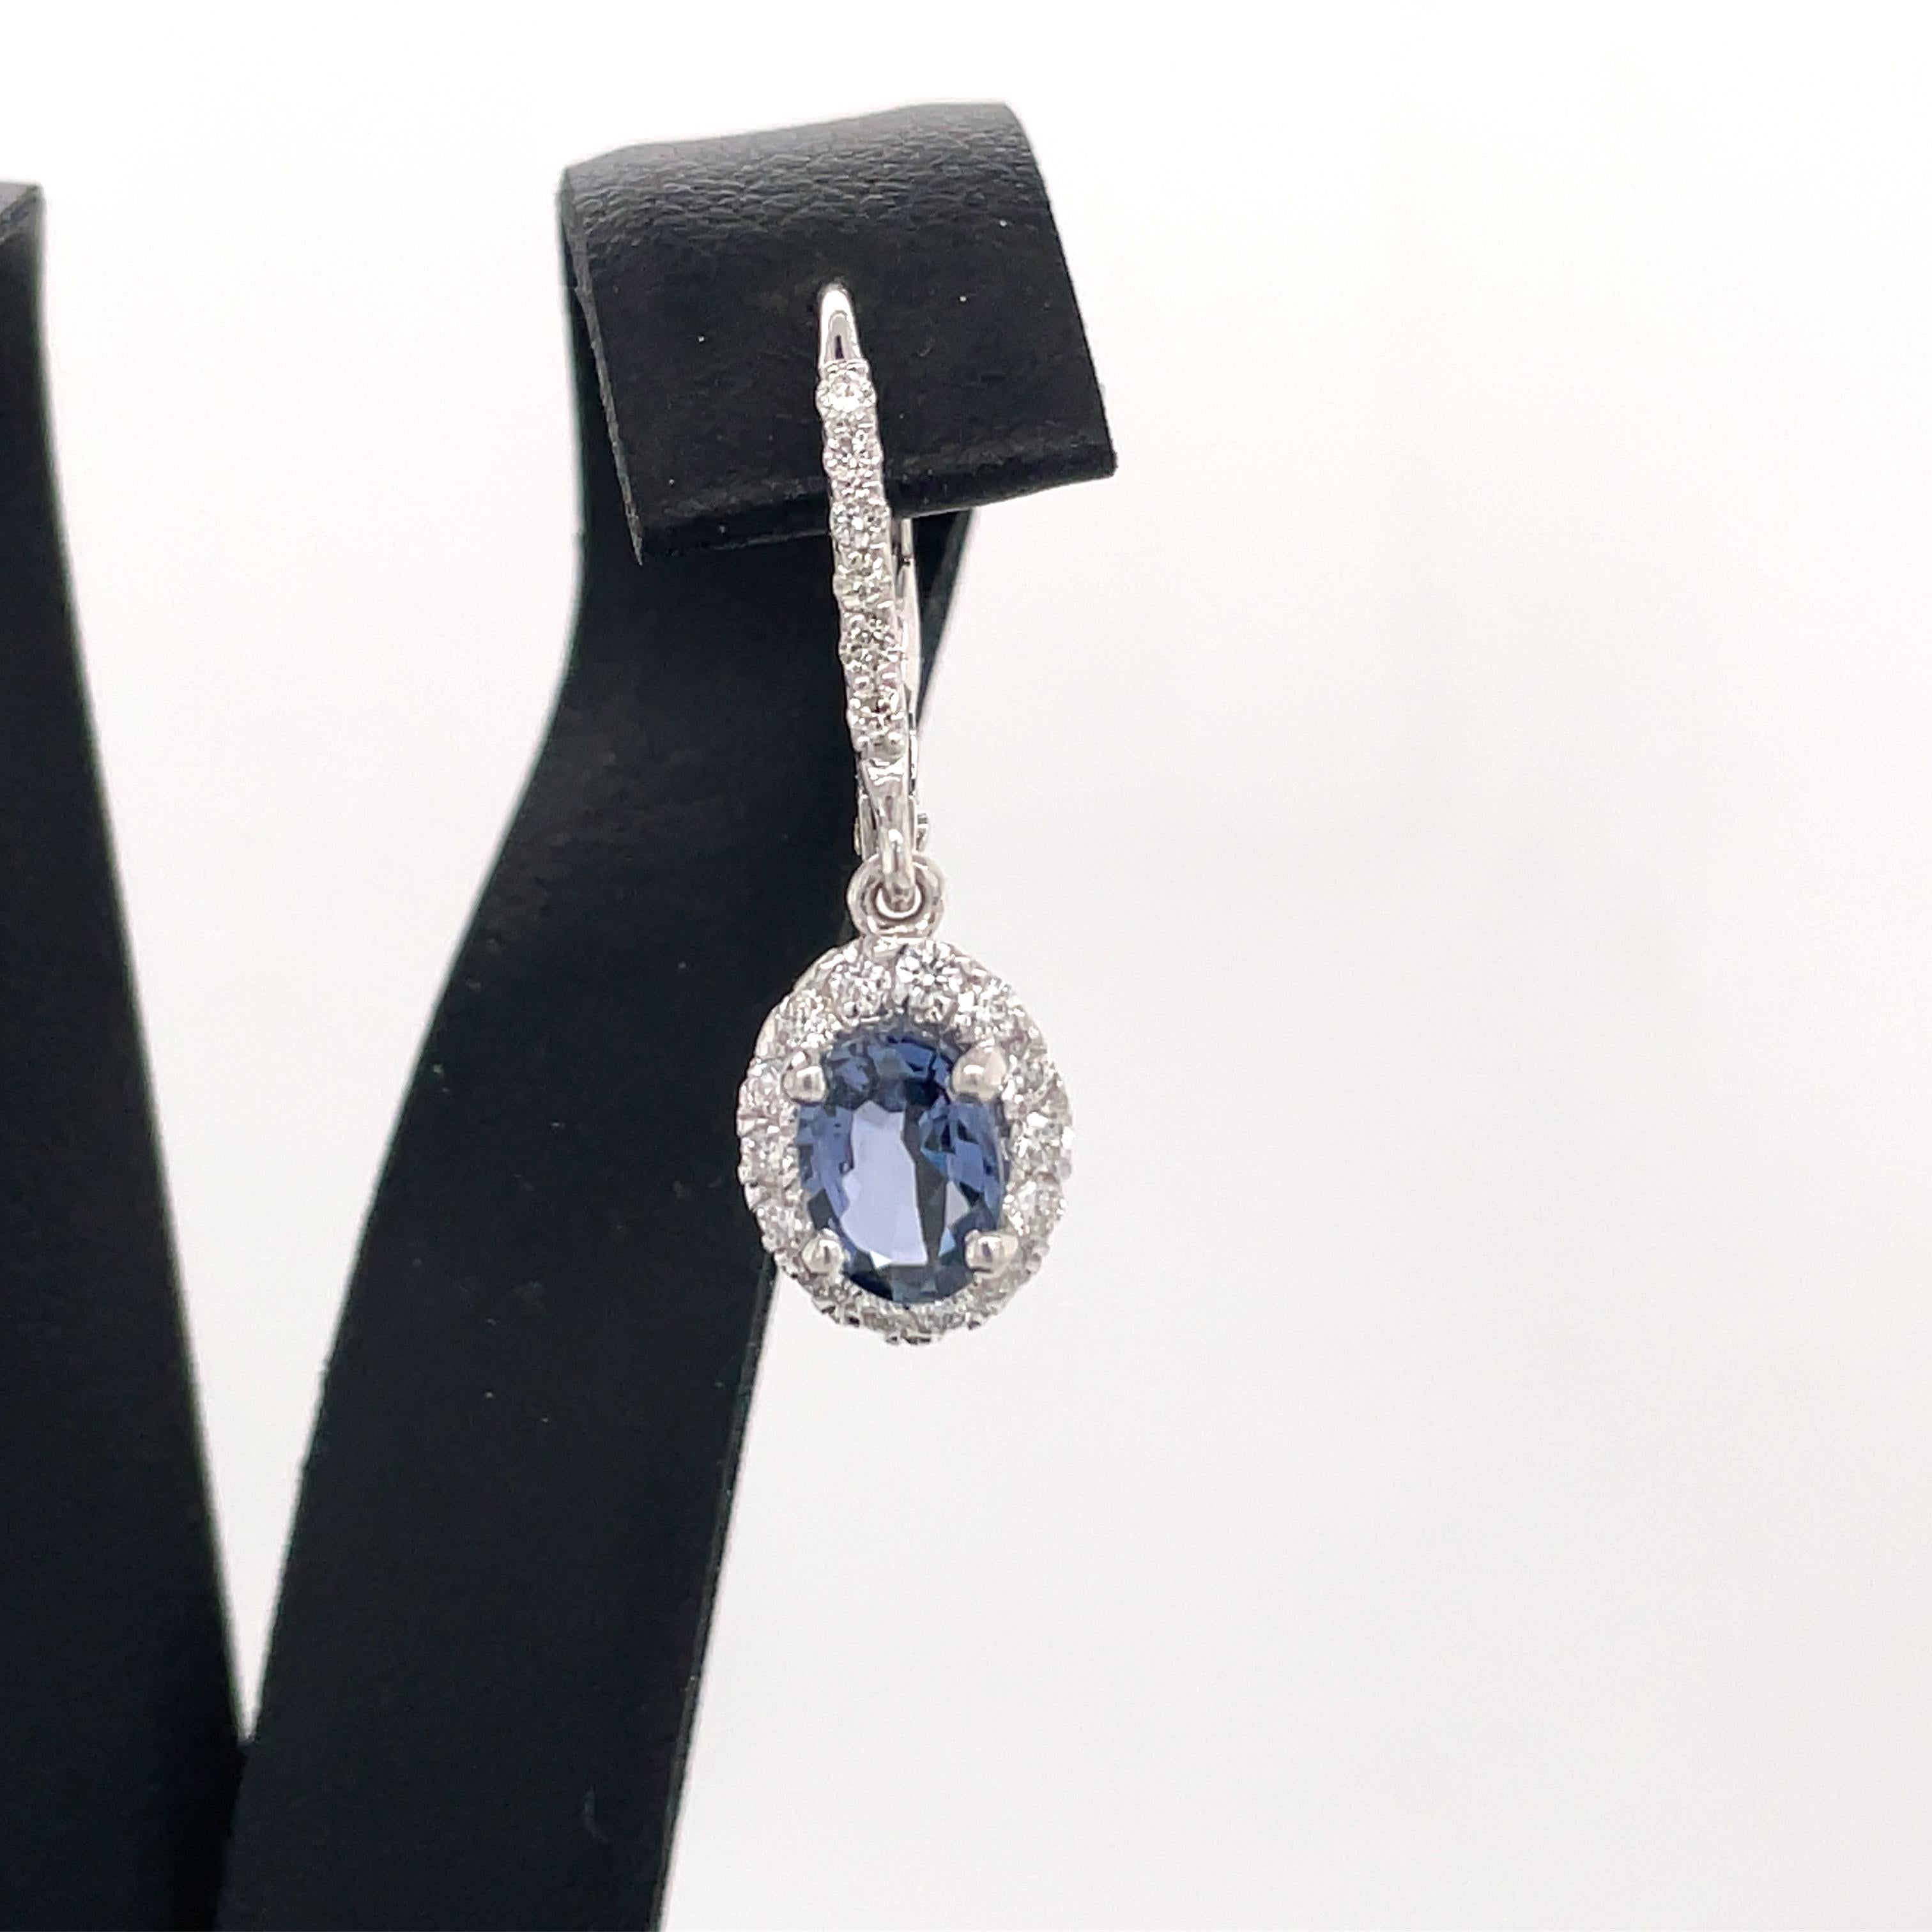 14 Karat white gold drop earrings featuring two Brillium treated oval shape Sapphires weighing 1.73 carats flanked with round brilliants weighing 0.53 carats. 